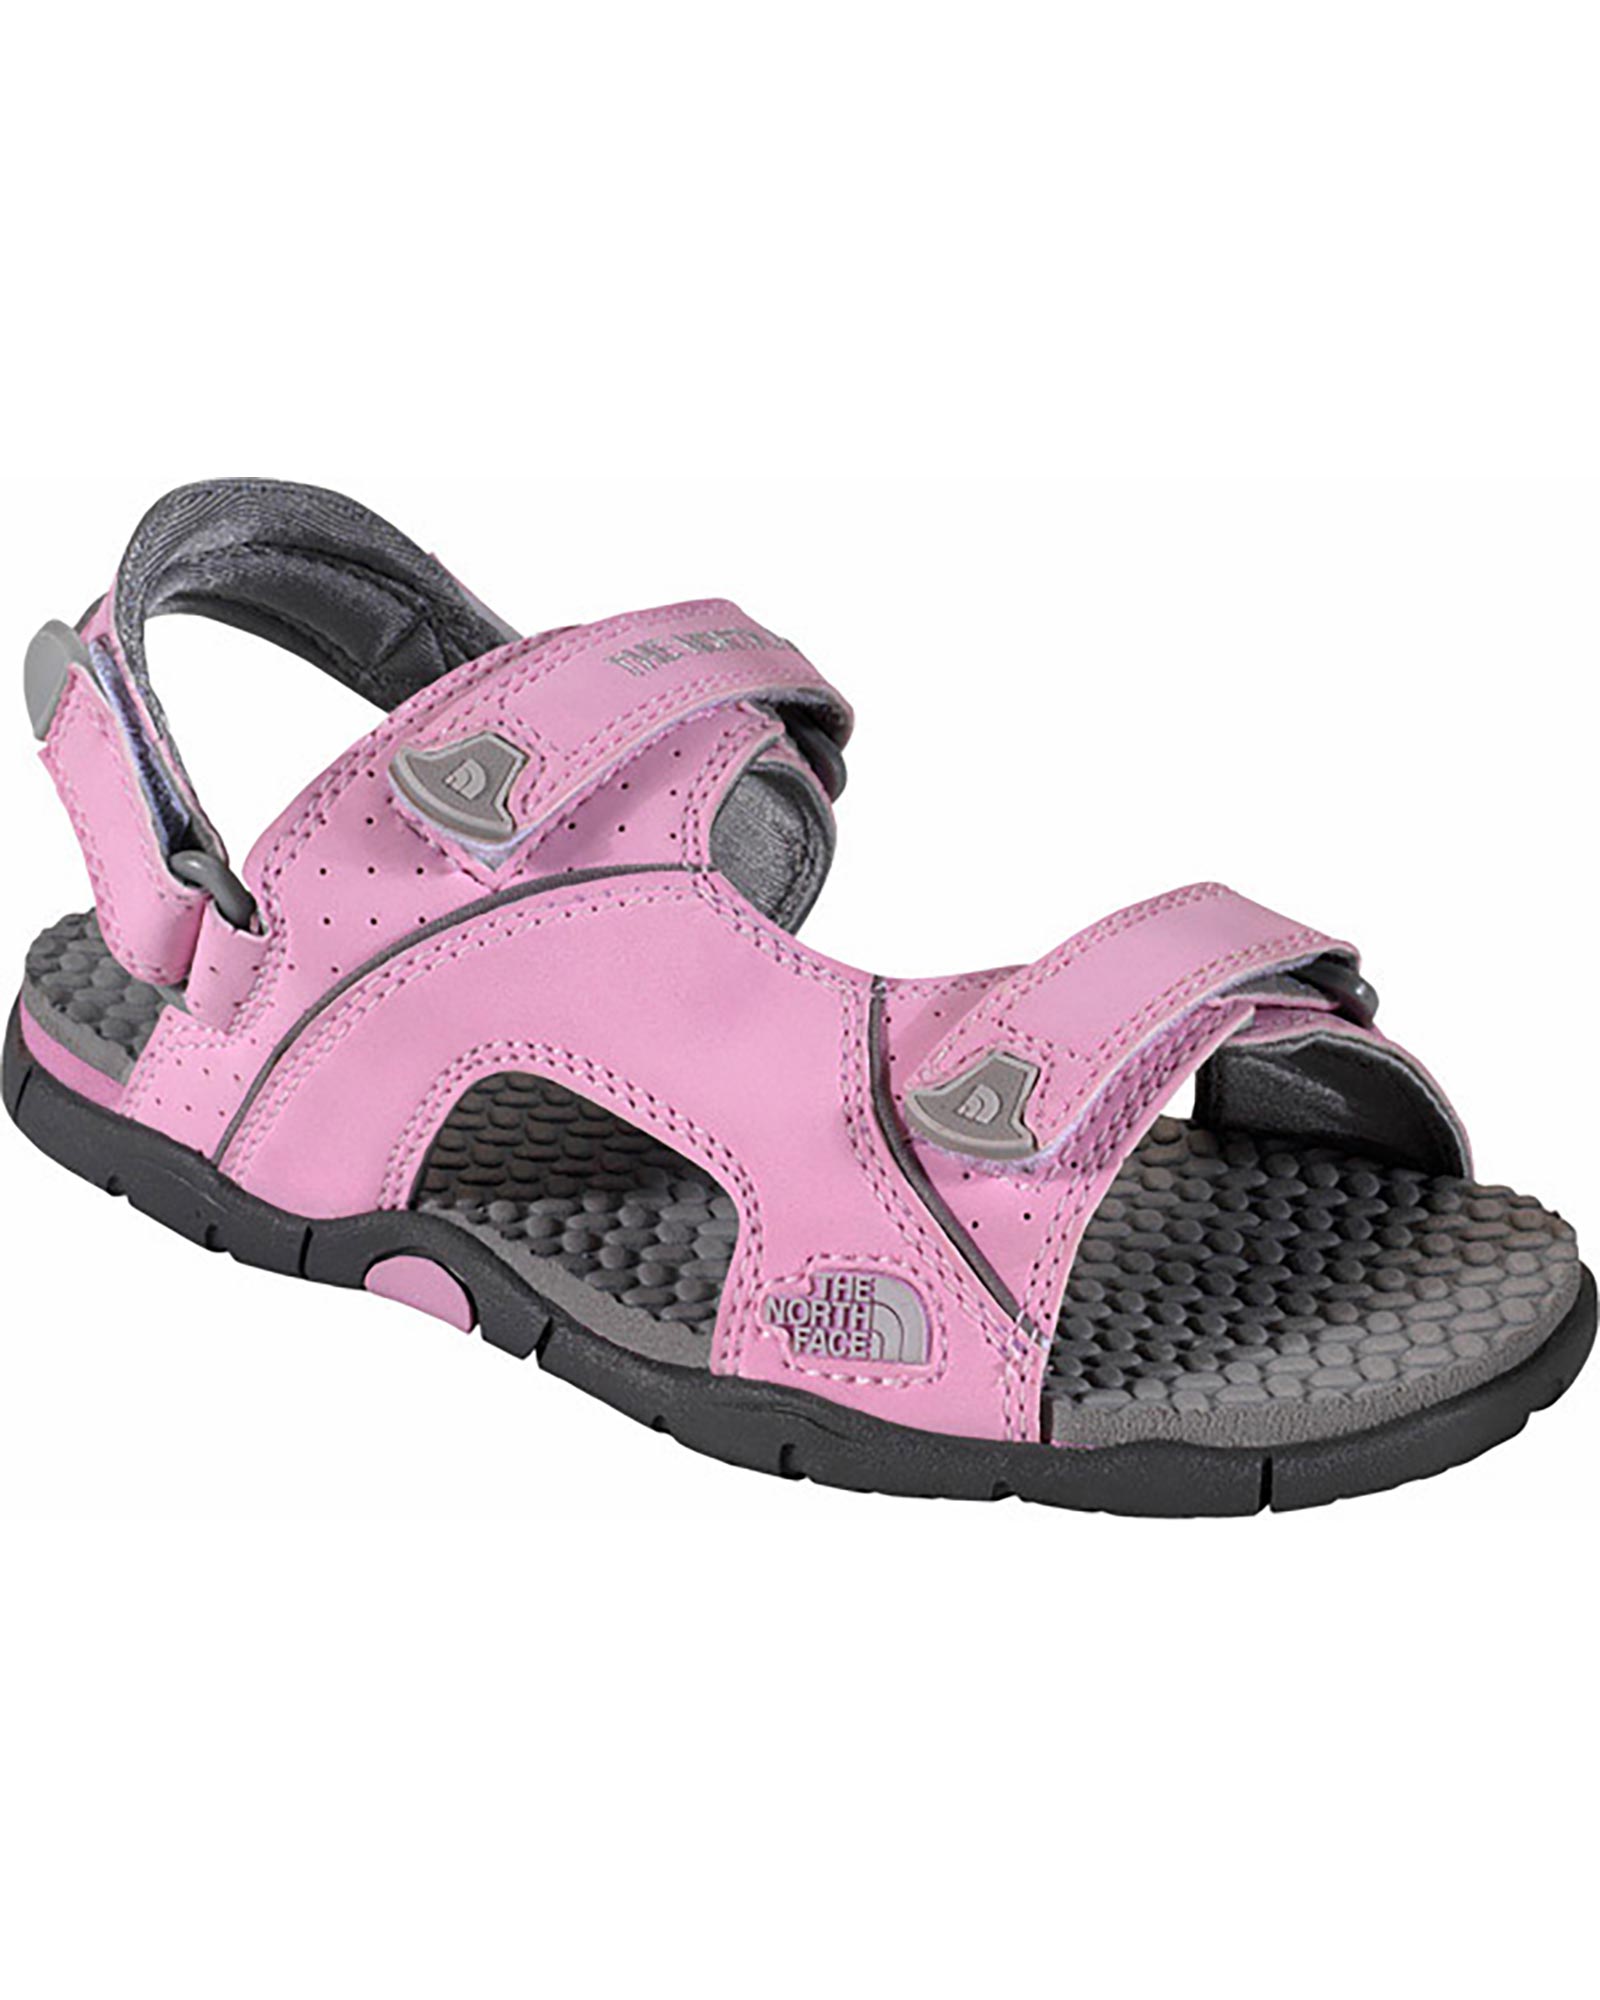 The North Face El Rio Girls’ Sandals - Pink Lady/Windchime Grey UK 2